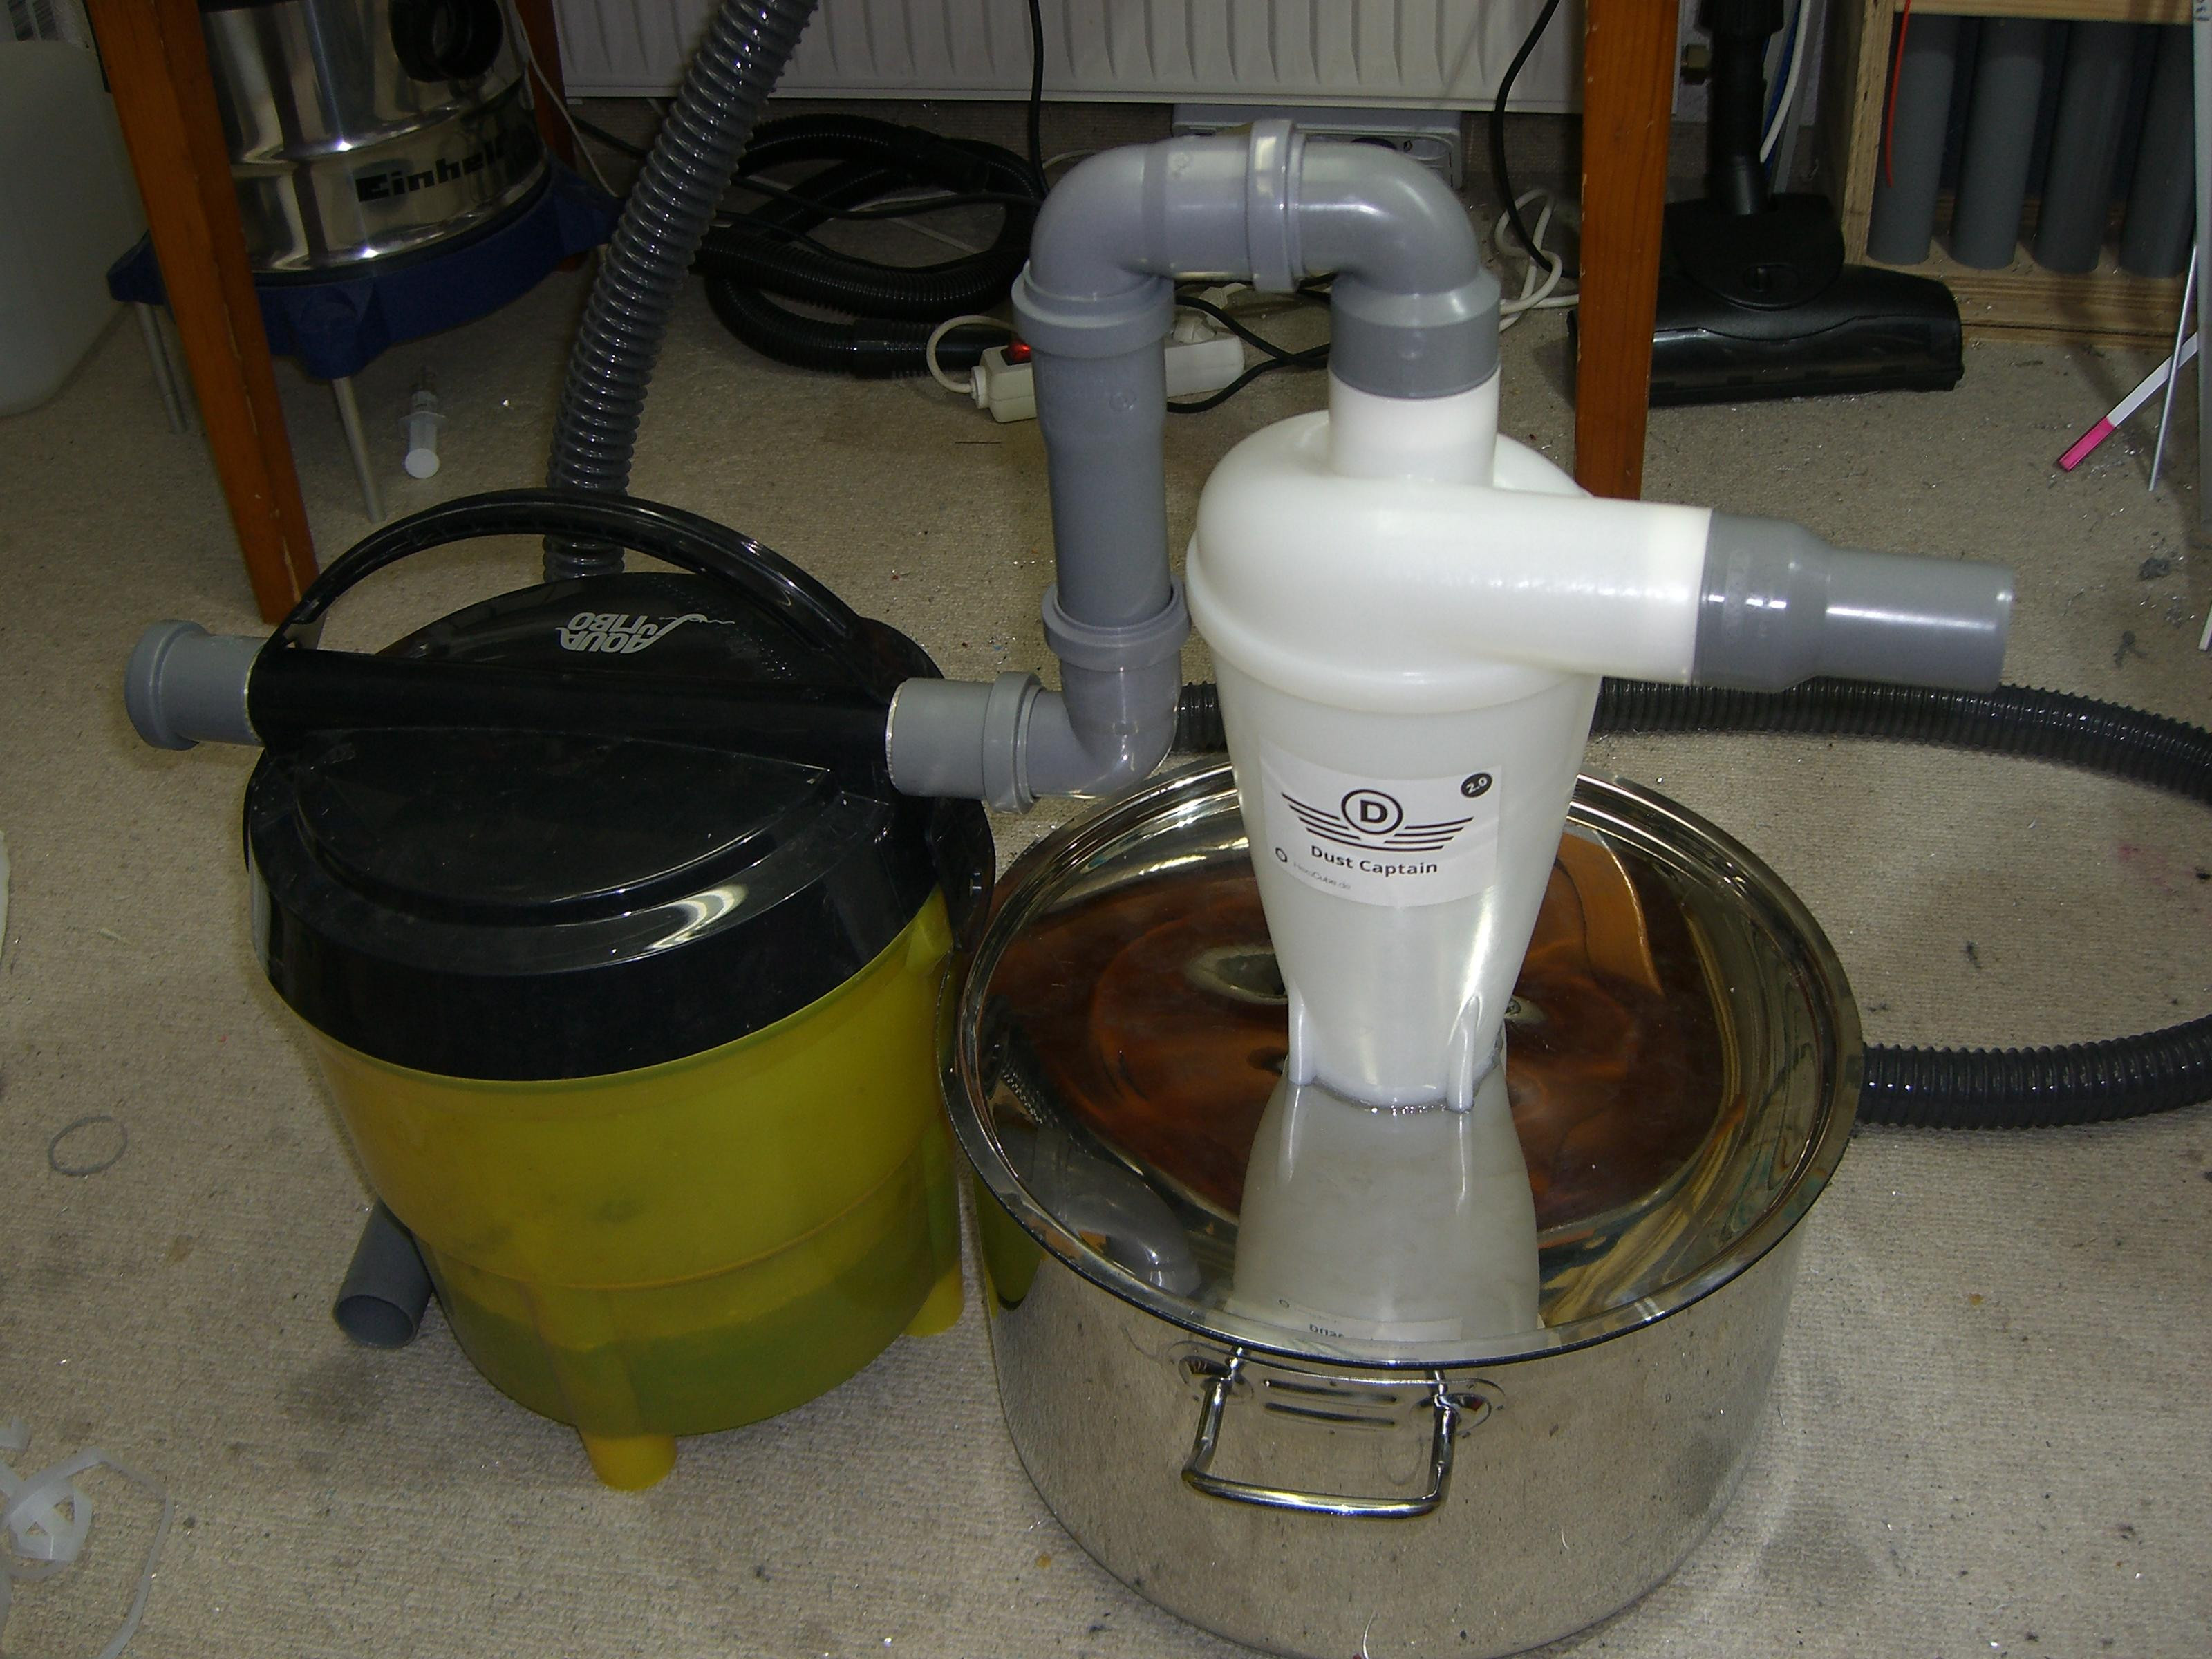 Best ideas about DIY Cyclone Dust Collection
. Save or Pin Dust Captain cyclone separator and DIY water prefilter for Now.